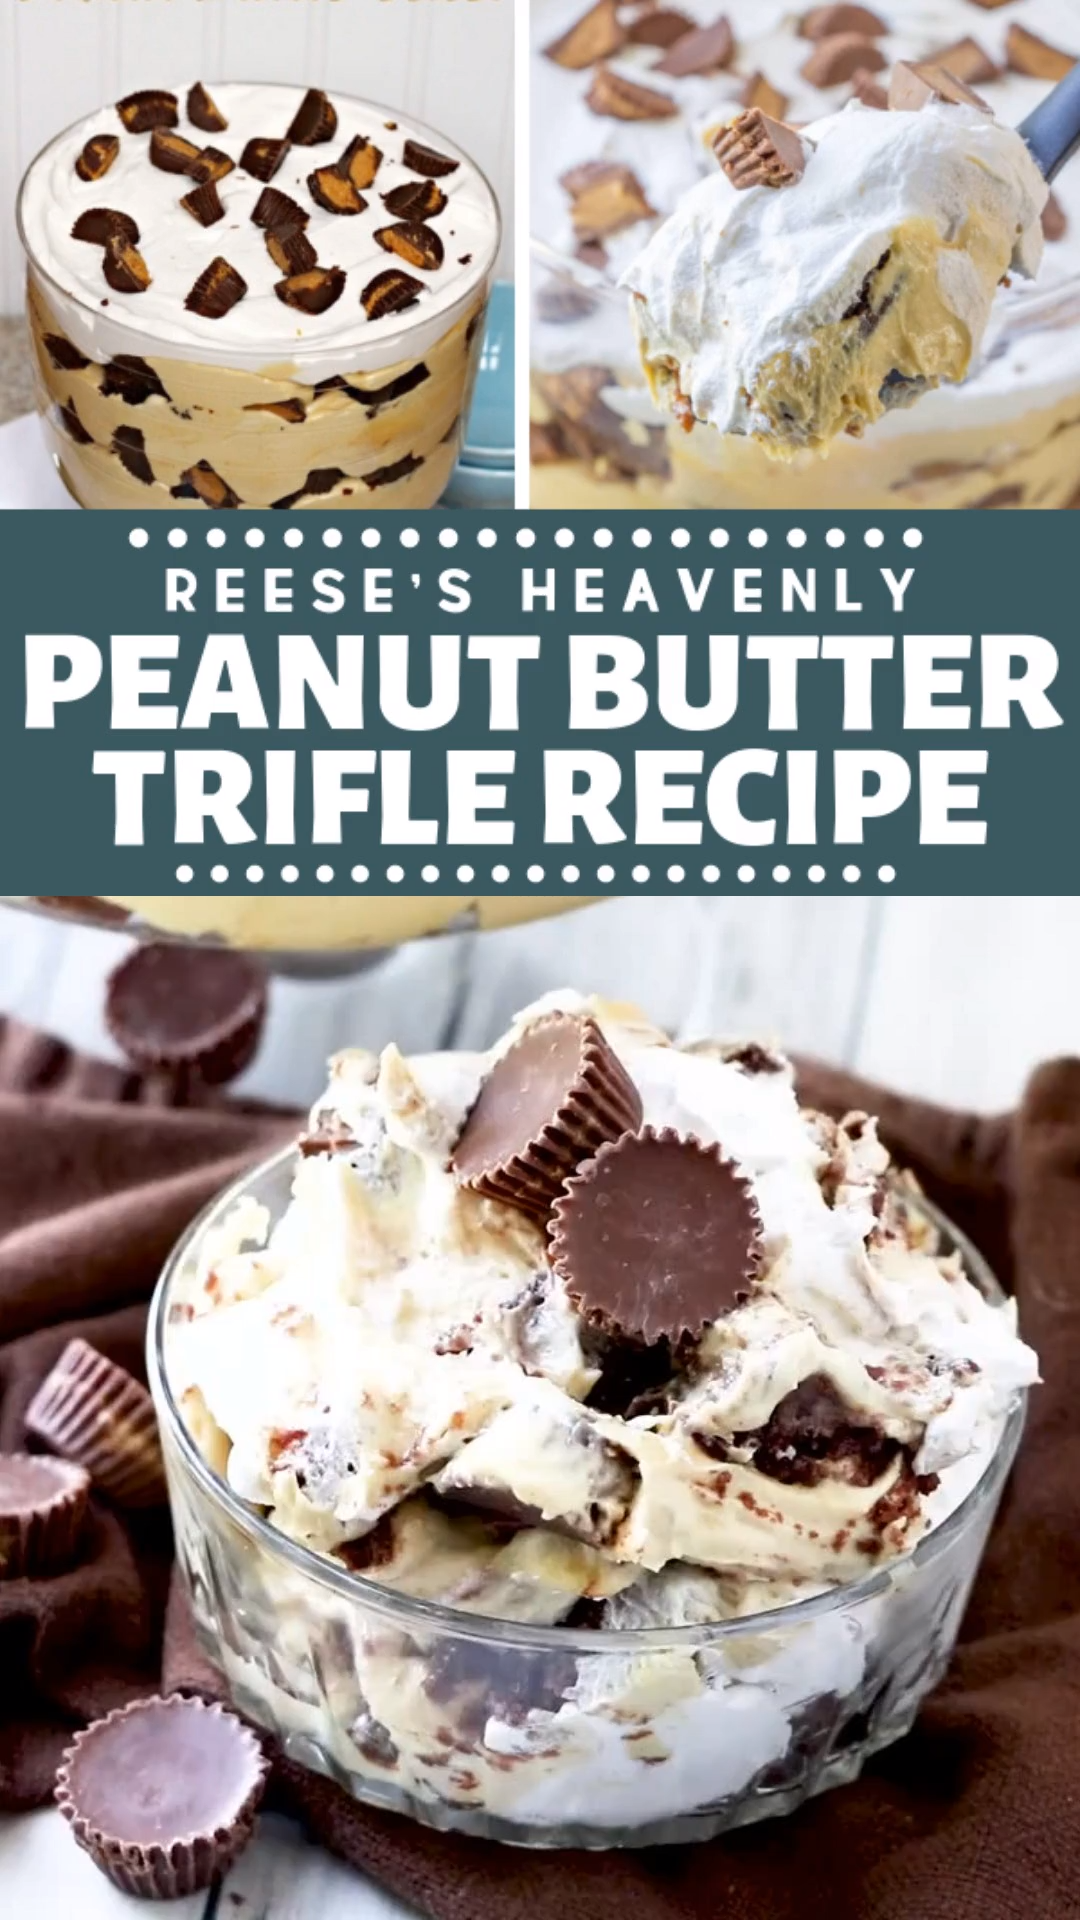 Reese's Heavenly Peanut Butter Trifle Recipe -   17 desserts For Parties entertaining ideas